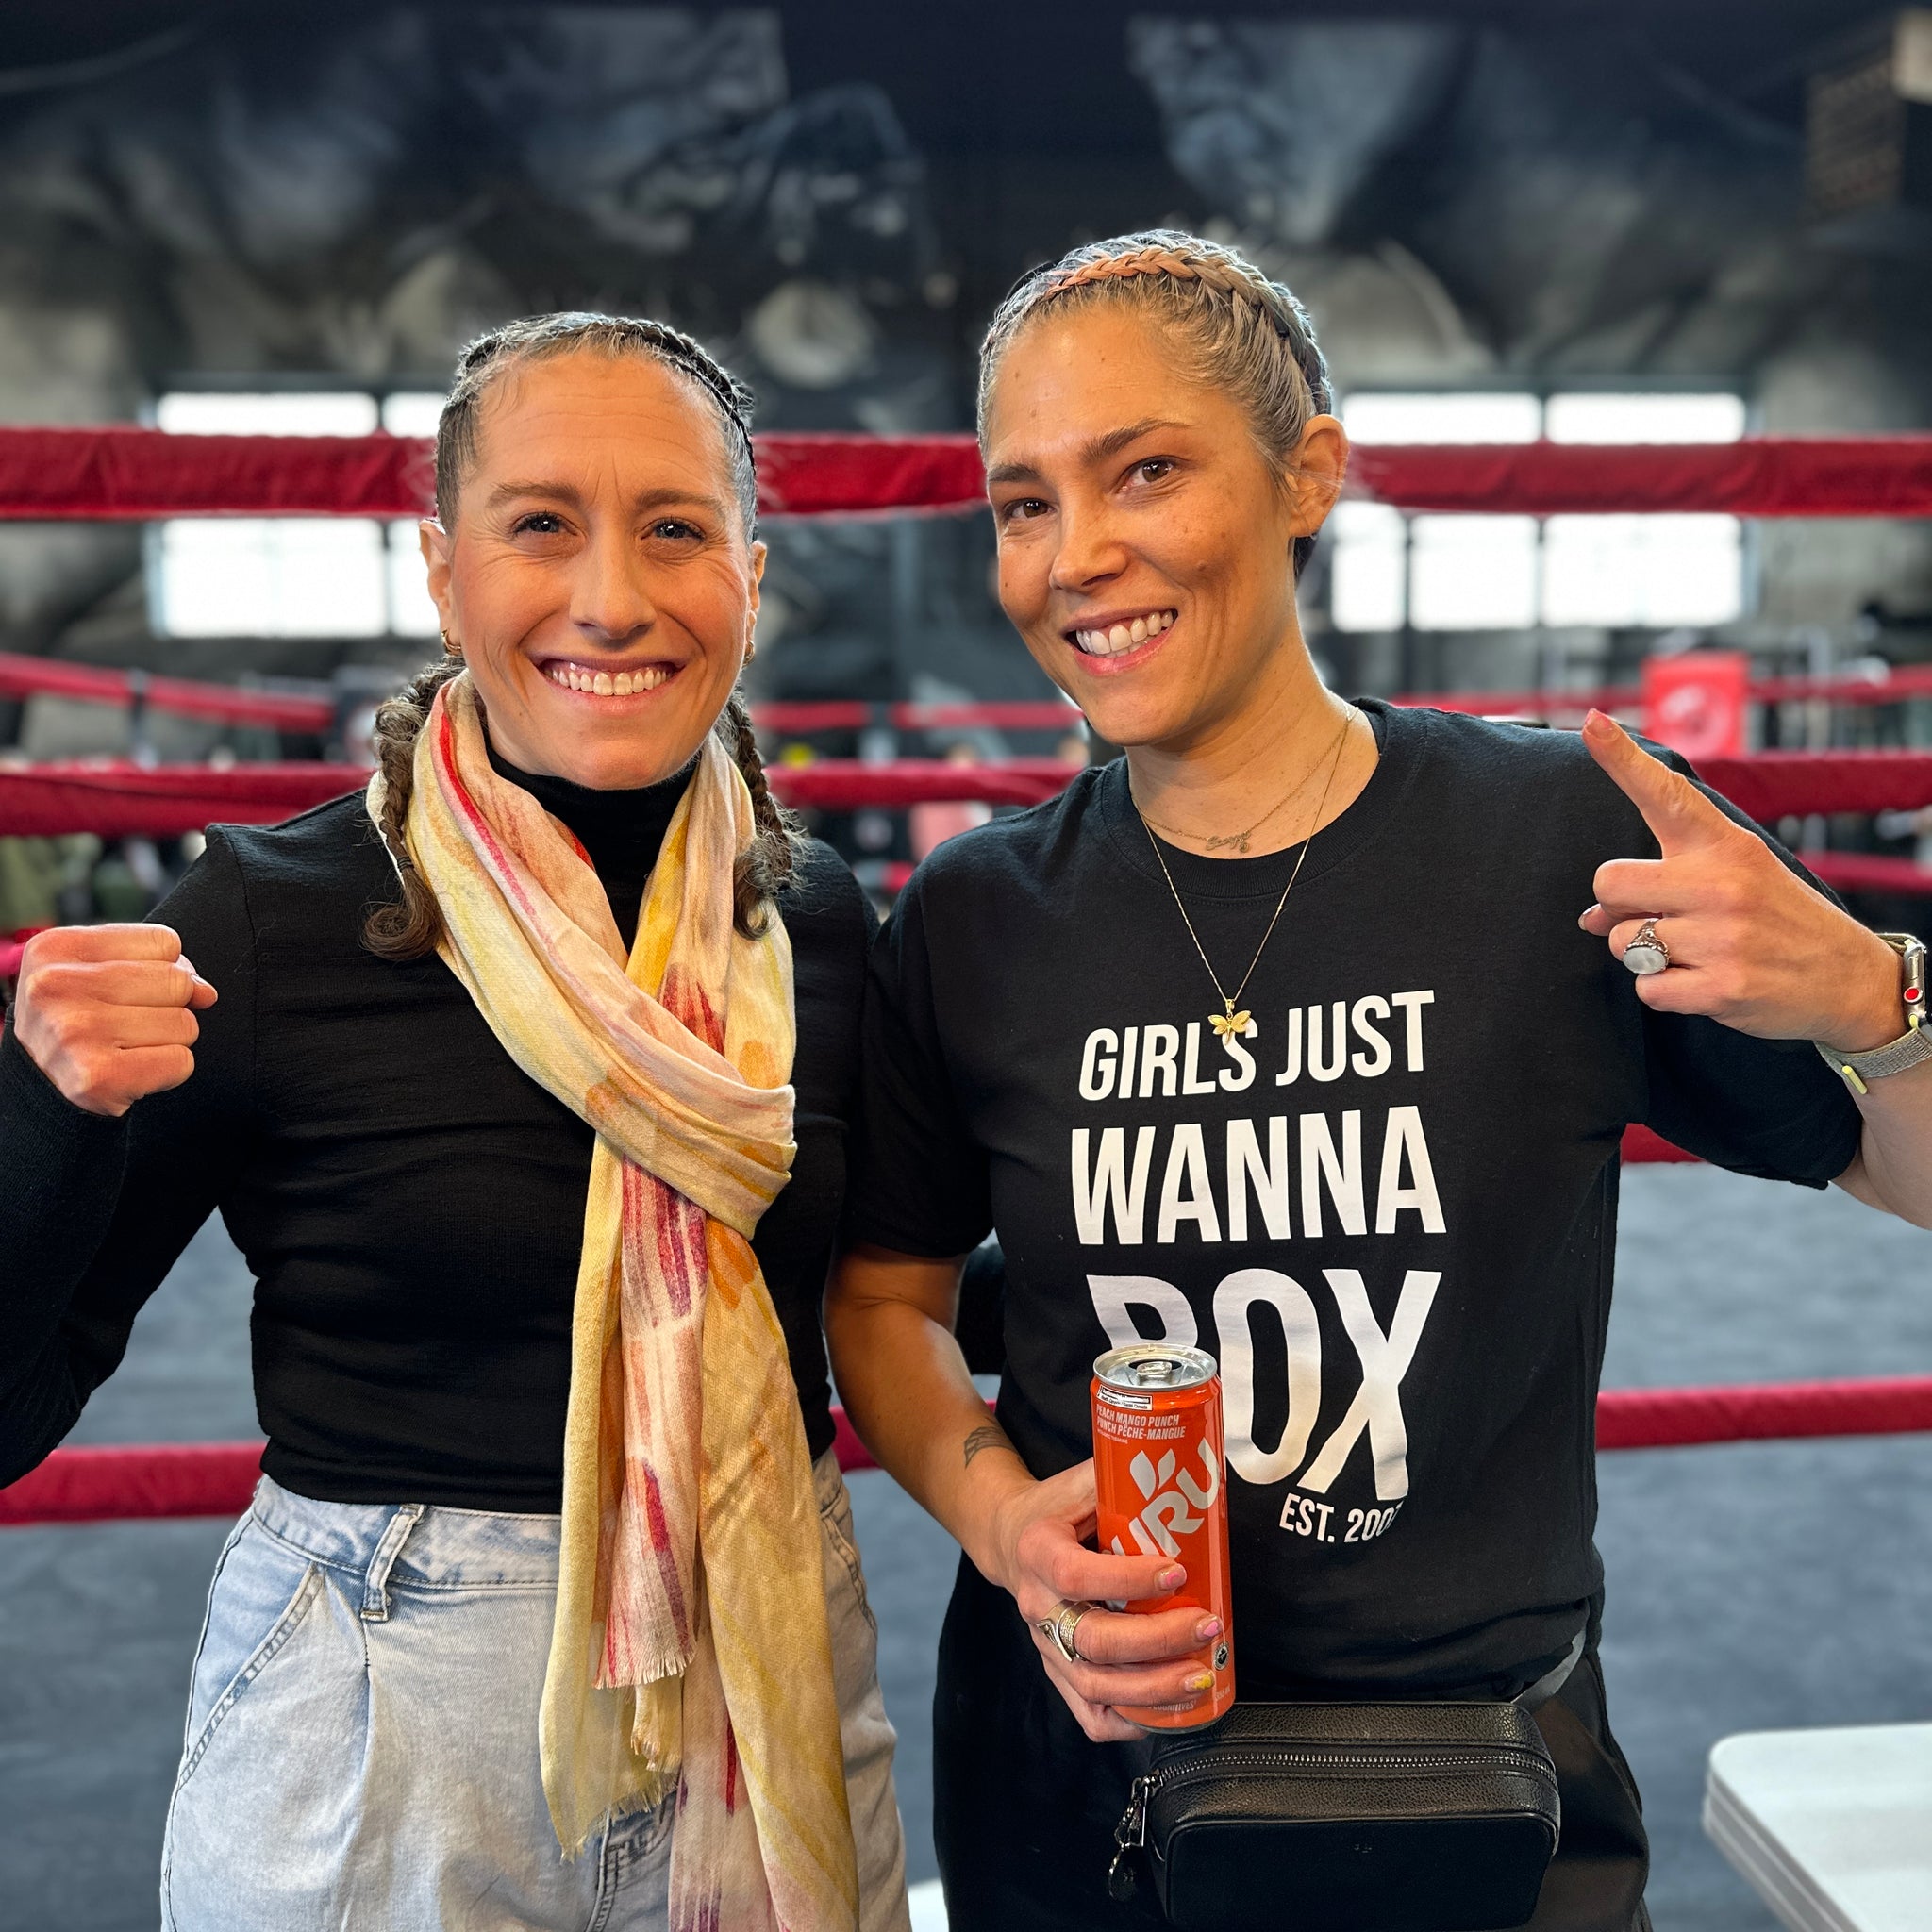 GJWB owners Helene & Kristina in front of a boxing ring